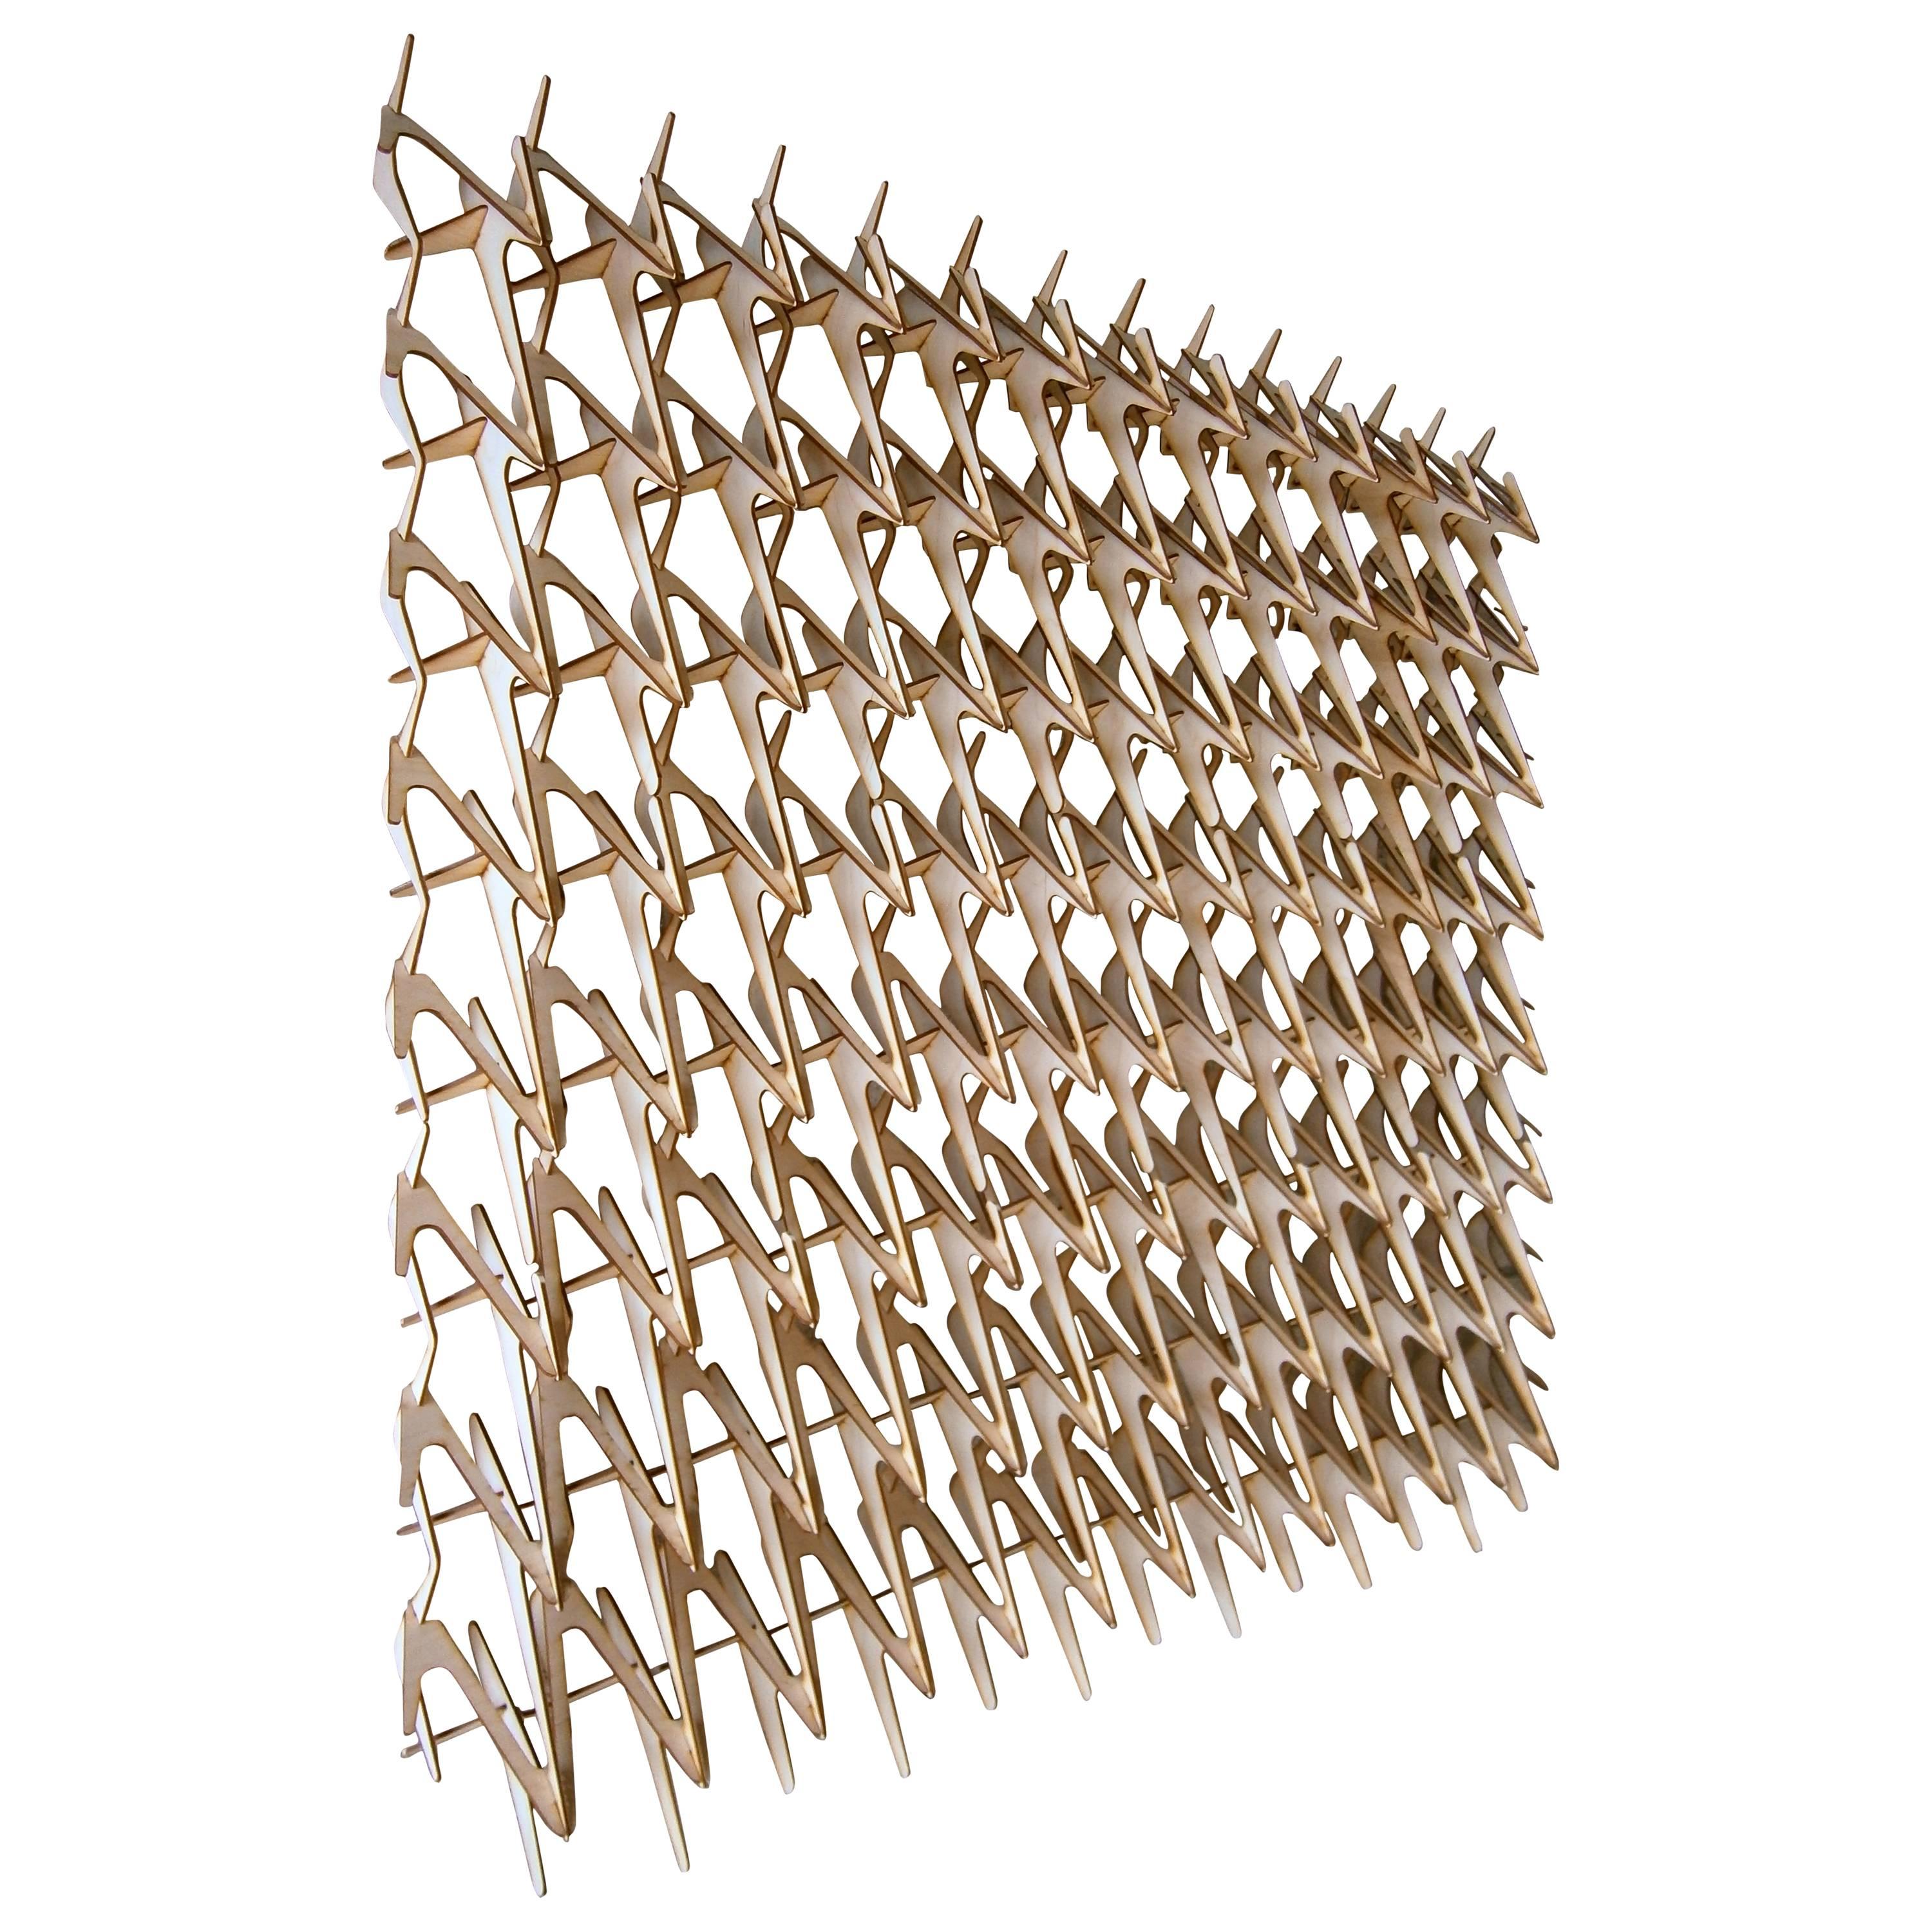 "Placoid" A Laser Cut Birch Plywood Construct By Christopher Puzio C.2012